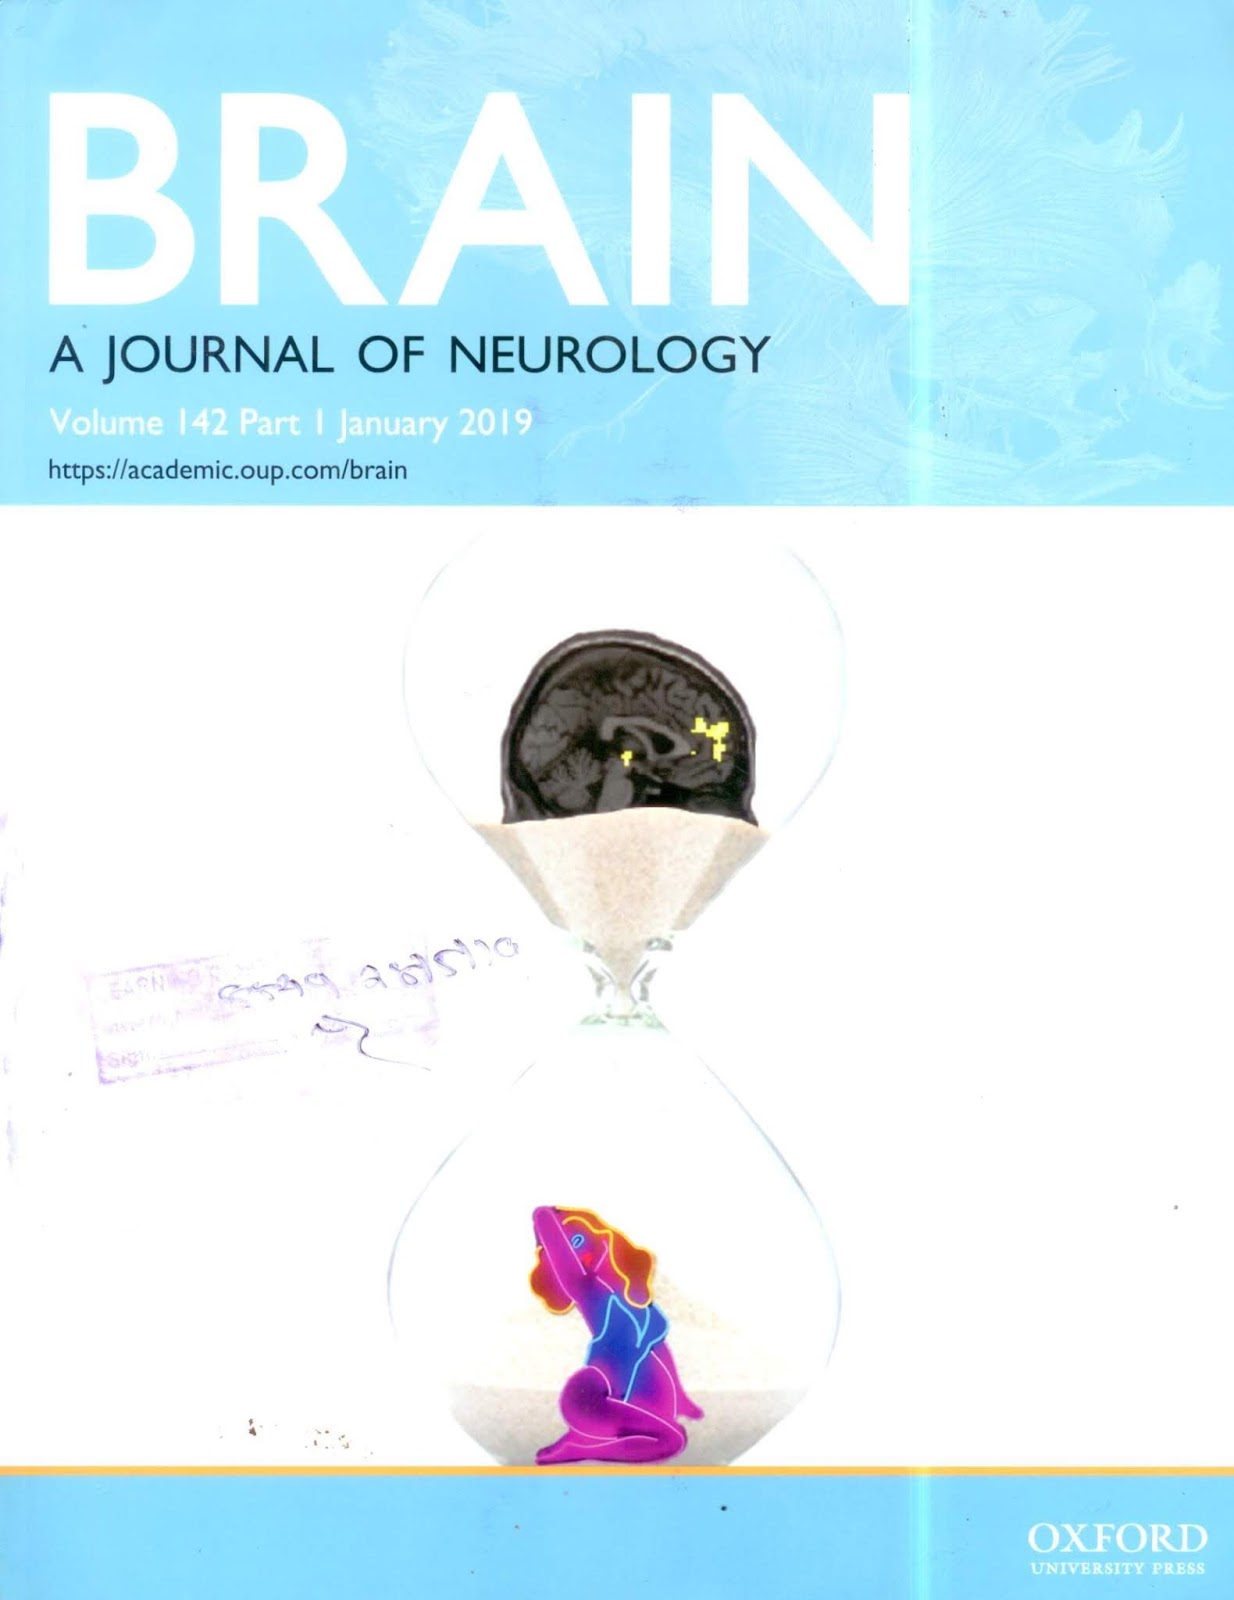 https://academic.oup.com/brain/issue/142/1